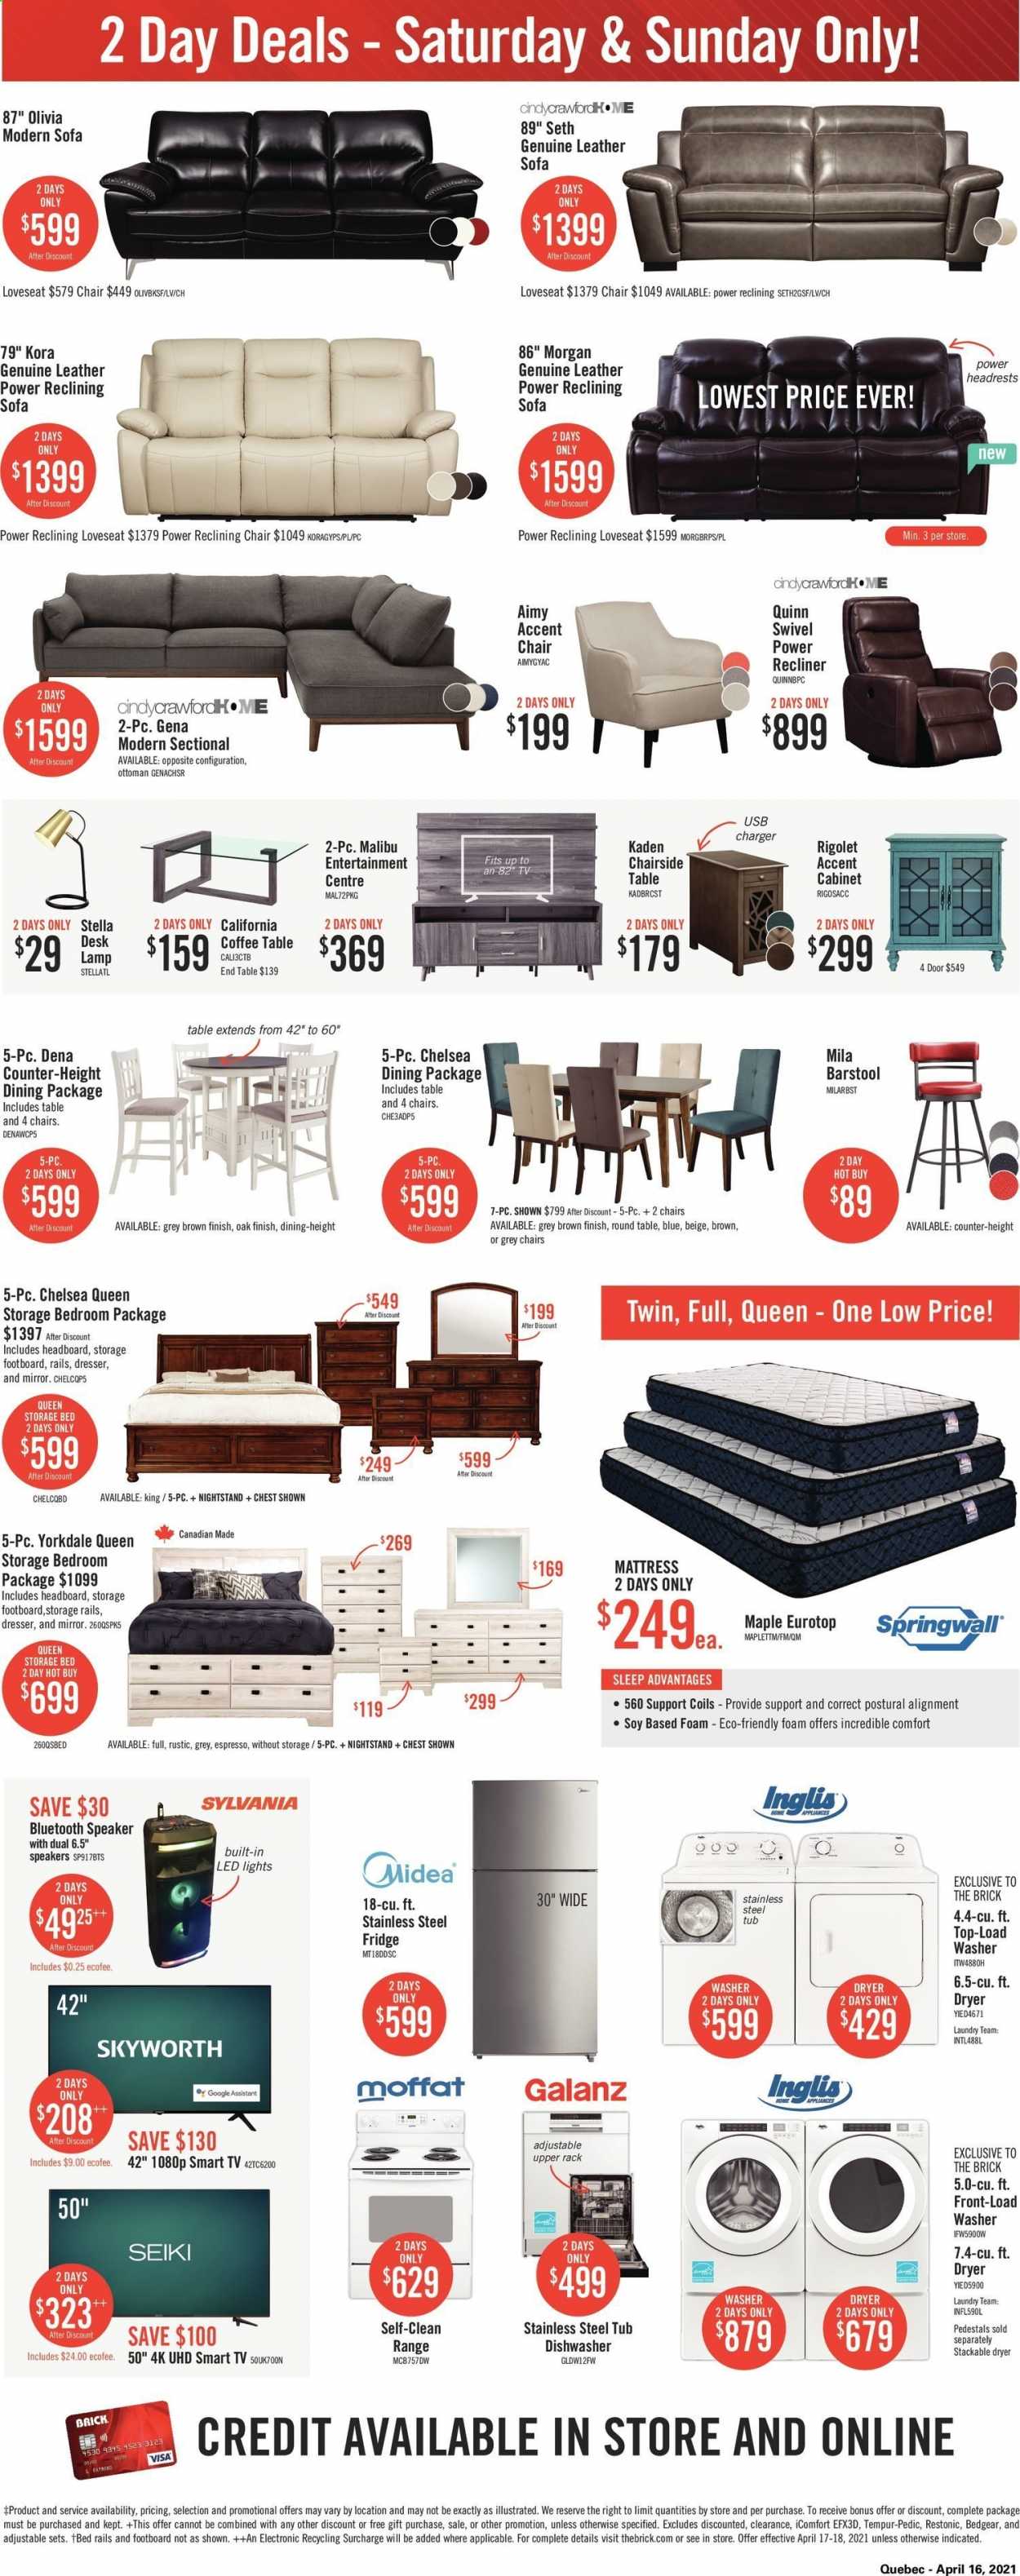 thumbnail - The Brick Flyer - April 17, 2021 - April 18, 2021 - Sales products - refrigerator, fridge, dishwasher, washing machine, cabinet, chair, bar stool, accent chair, leather sofa, loveseat, sofa, recliner chair, coffee table, end table, ottoman, storage bed, headboard, mattress, dresser, nightstand, mirror, lamp, LED light, smart tv. Page 2.